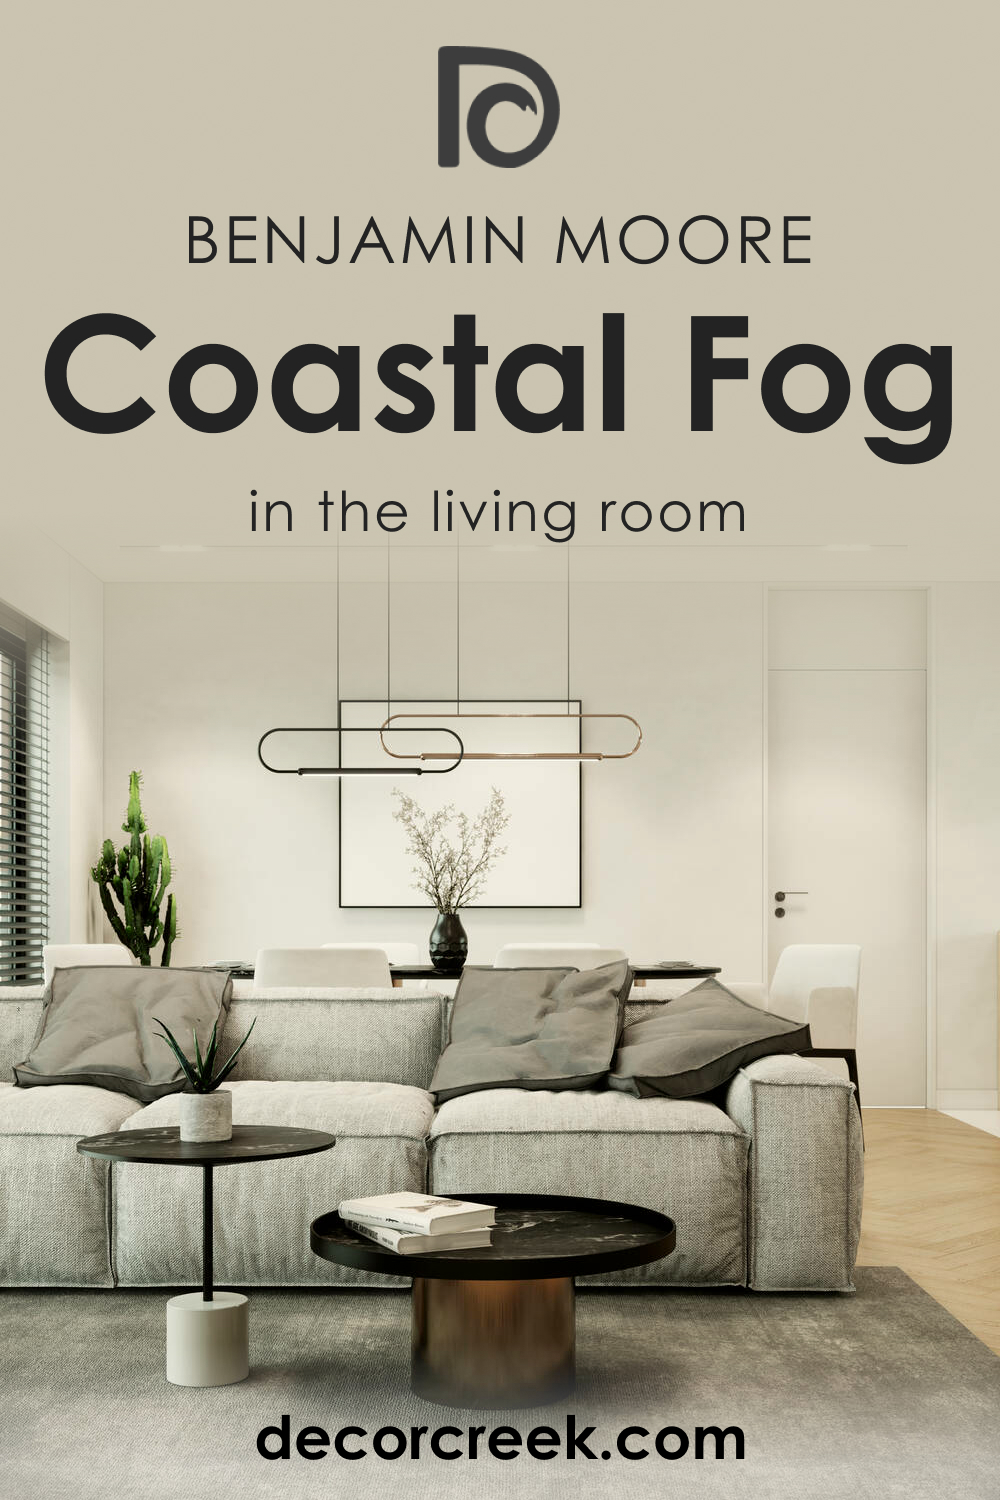 How to Use Coastal Fog AC-1 in the Living Room?